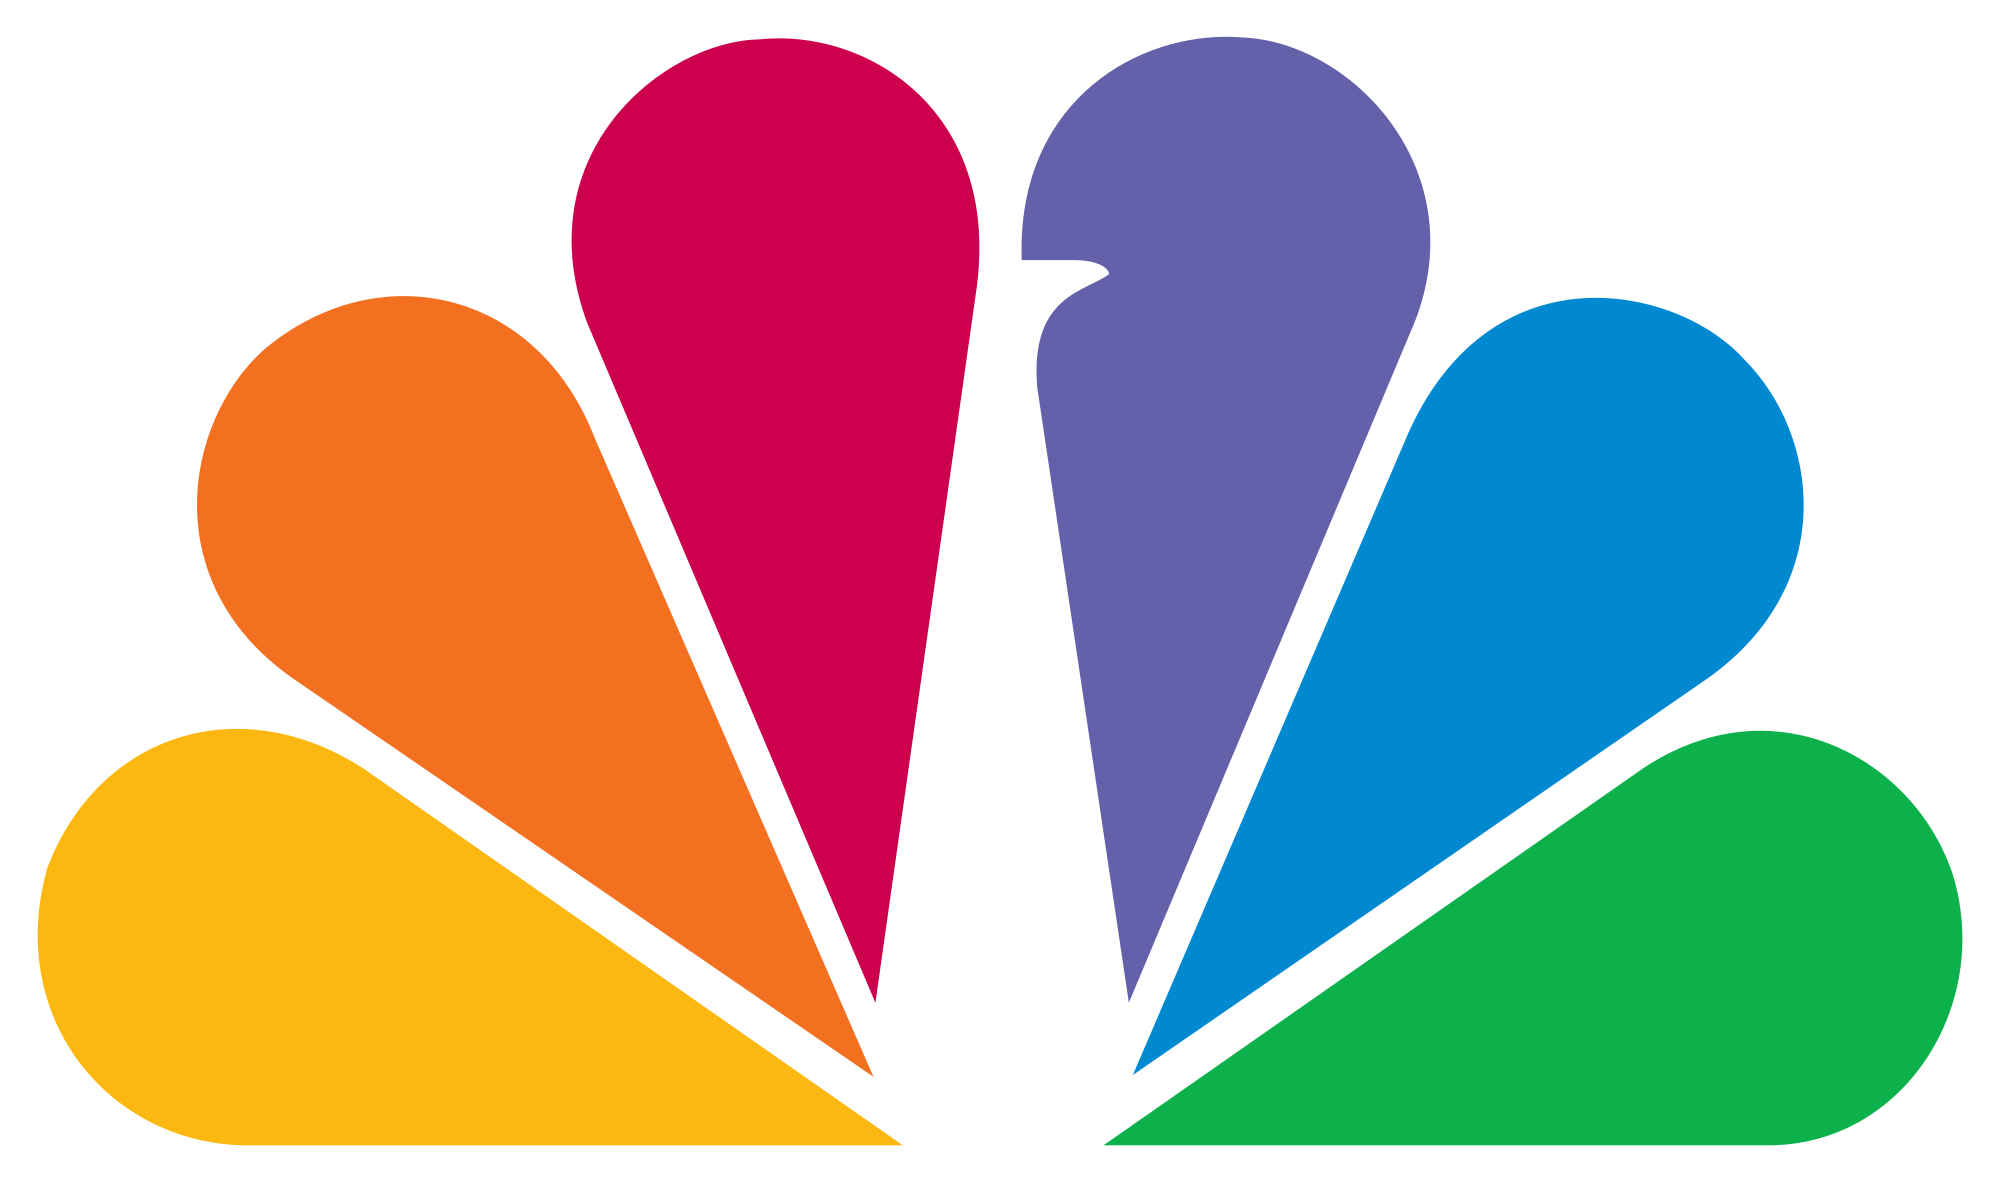 Creative Use Of Negative Space Is Also Related To Simplicity - Nbc Logo (2000x1182)